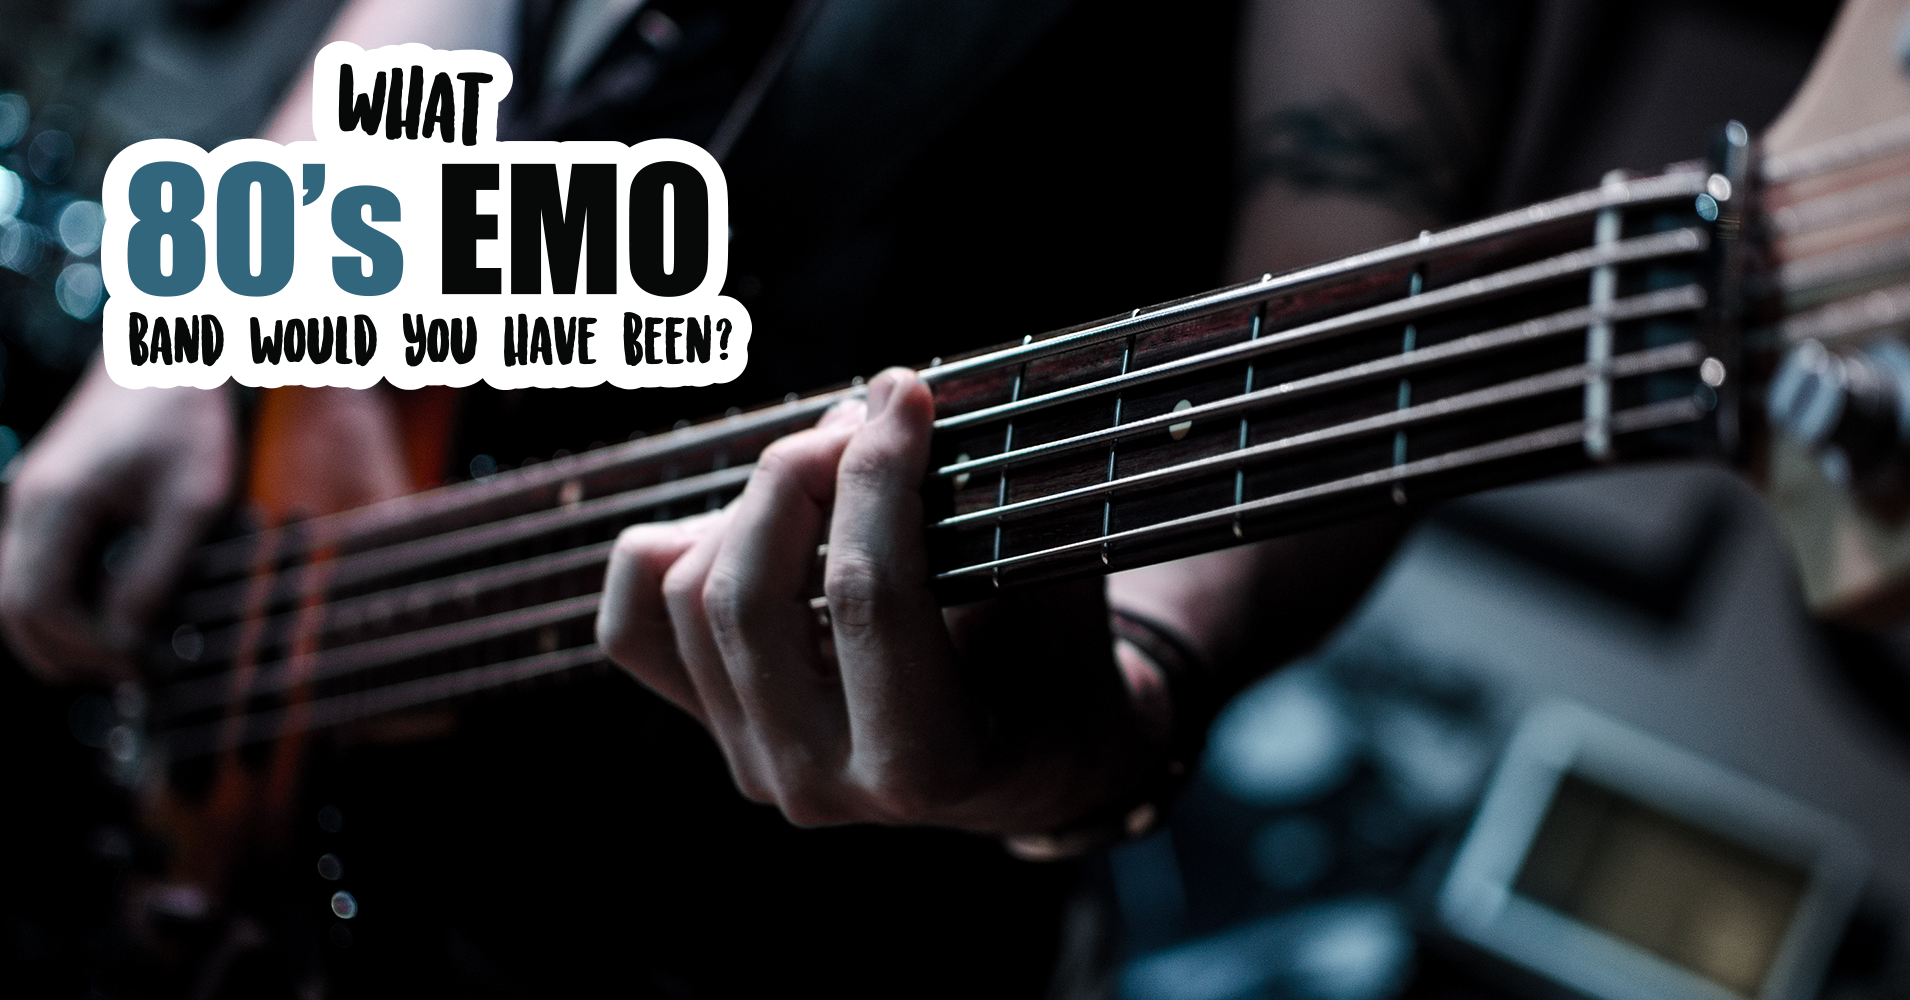 What '80s Emo Band Would You Have Been? Question 1 - Which 1960s band ...